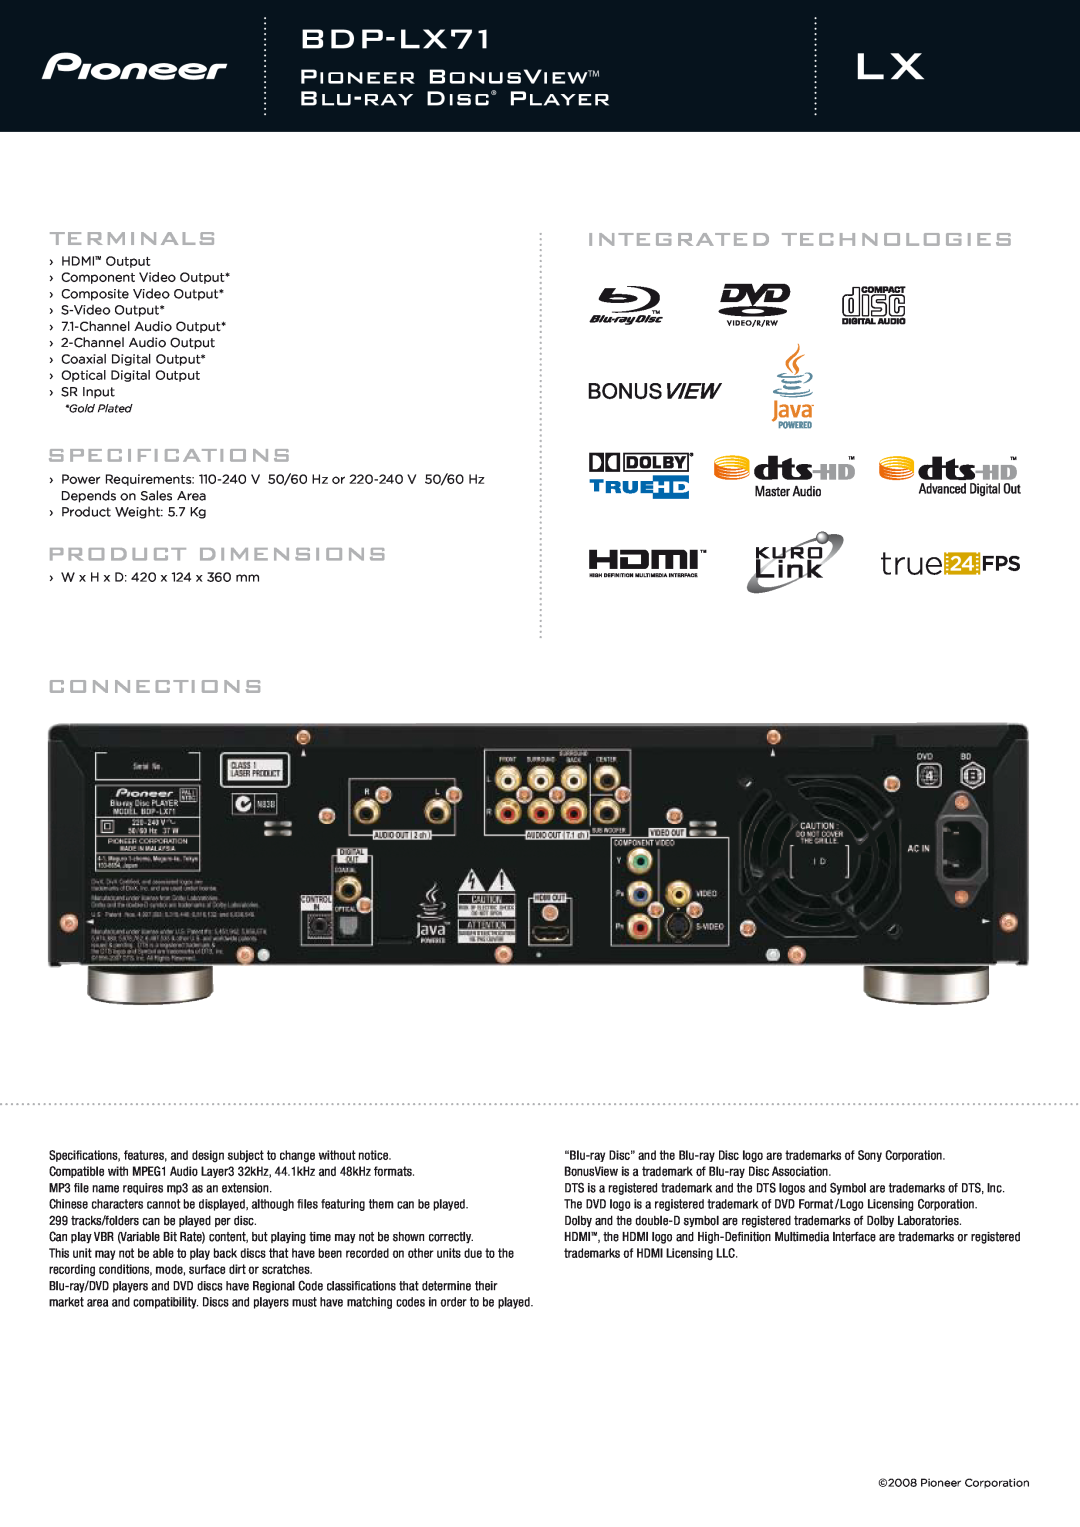 Pioneer BDP-LX71 manual Terminals, Integrated Technologies, Specifications, Product Dimensions, Connections 